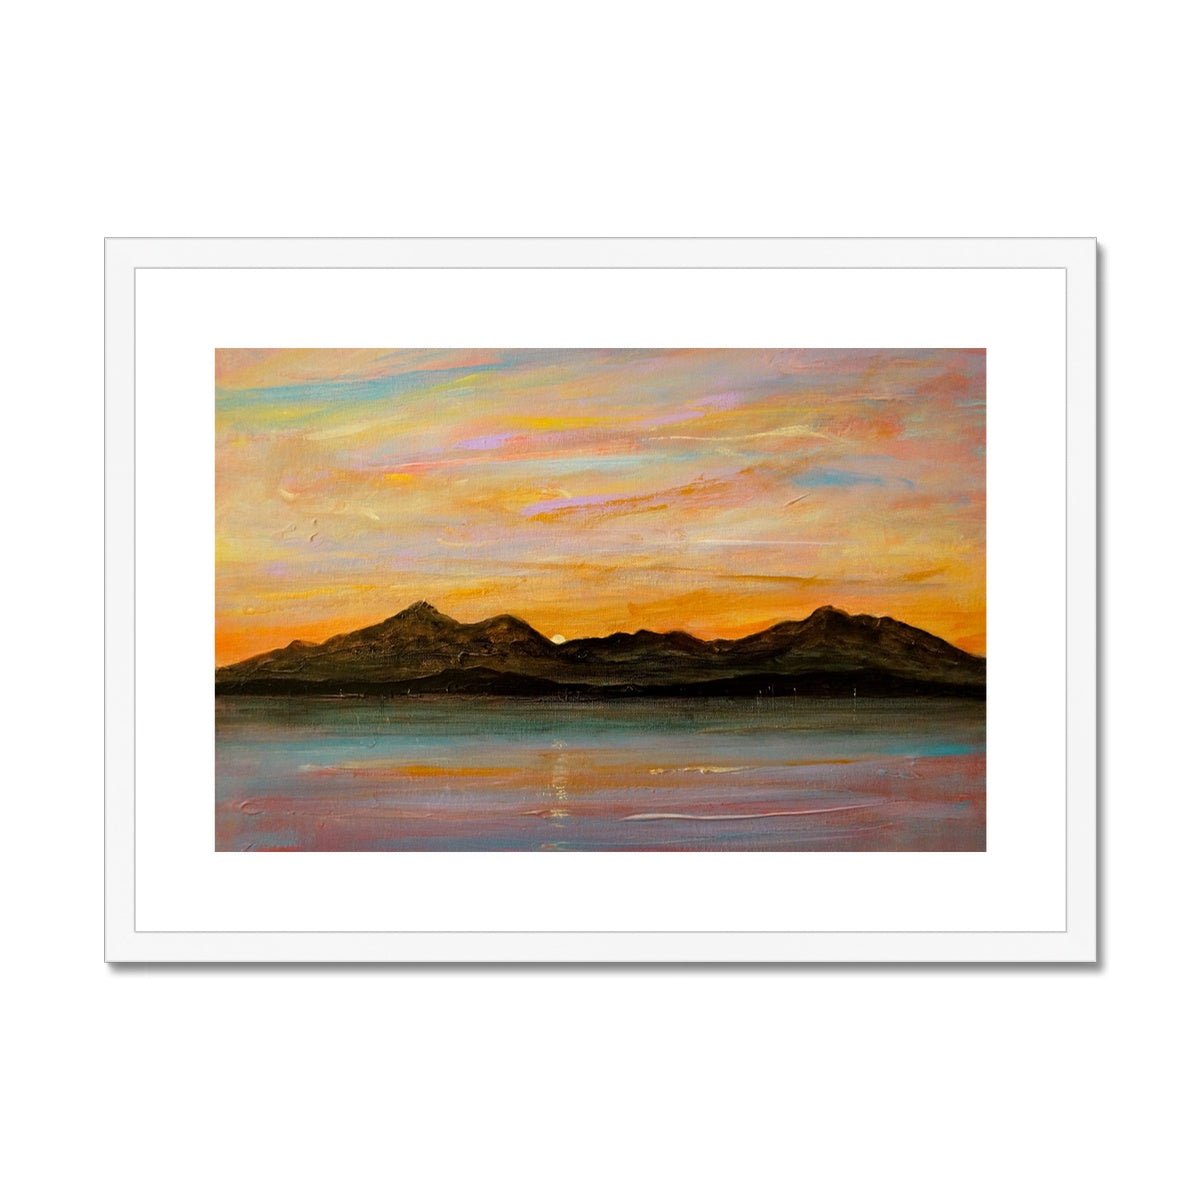 The Sleeping Warrior Arran Painting | Framed & Mounted Prints From Scotland-Framed & Mounted Prints-Arran Art Gallery-A2 Landscape-White Frame-Paintings, Prints, Homeware, Art Gifts From Scotland By Scottish Artist Kevin Hunter